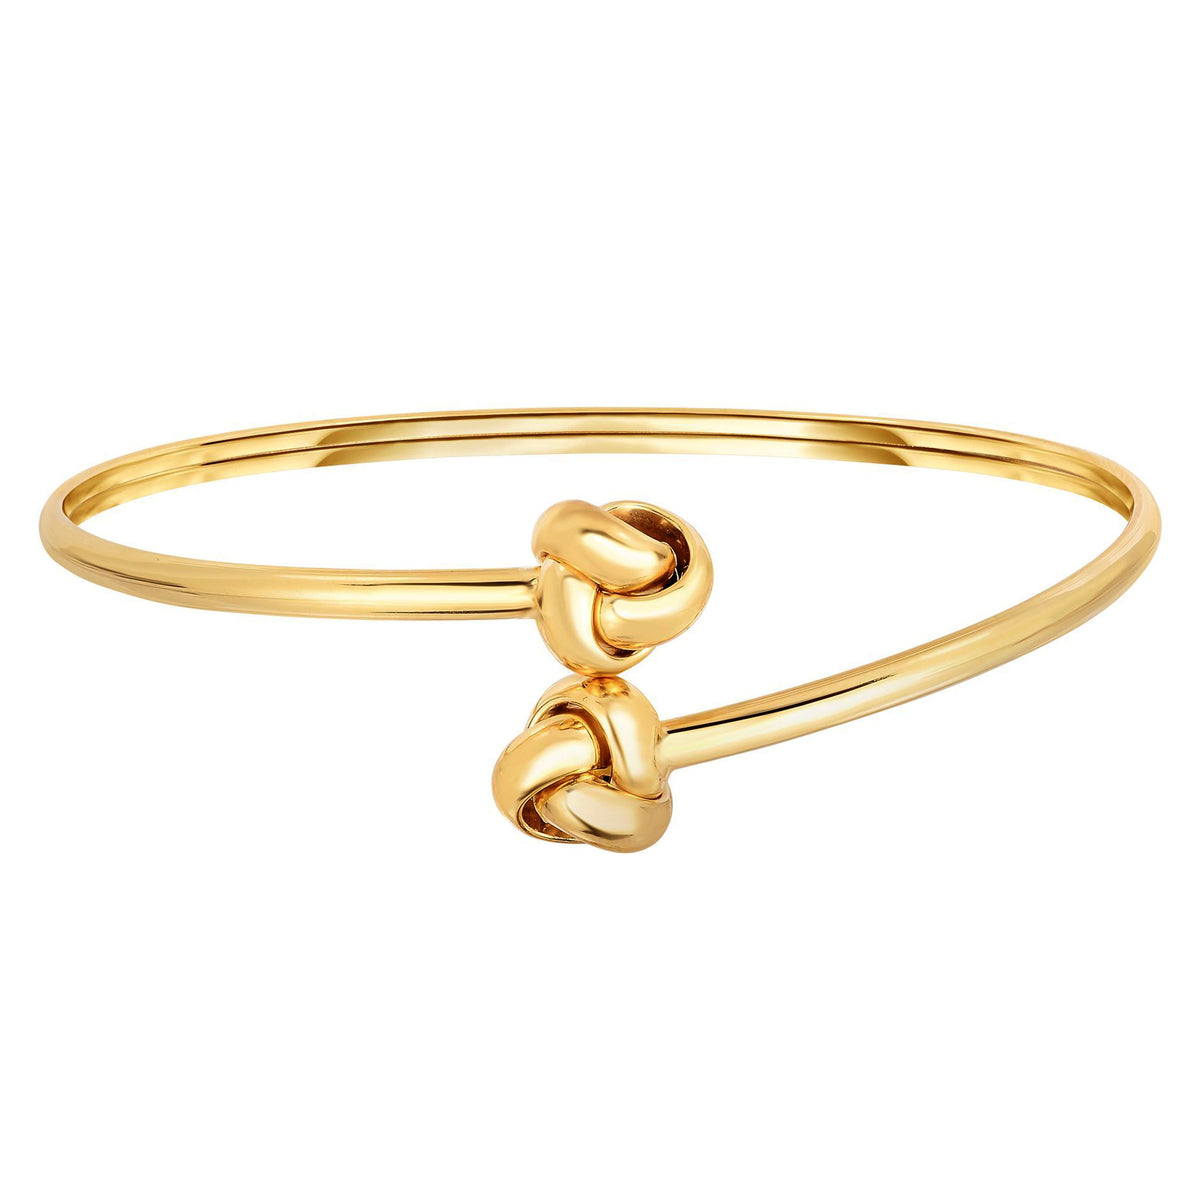 14k Yellow Gold Shiny Double Love Knot Tip Fancy Bypass Fancy Bangle, 7.25"